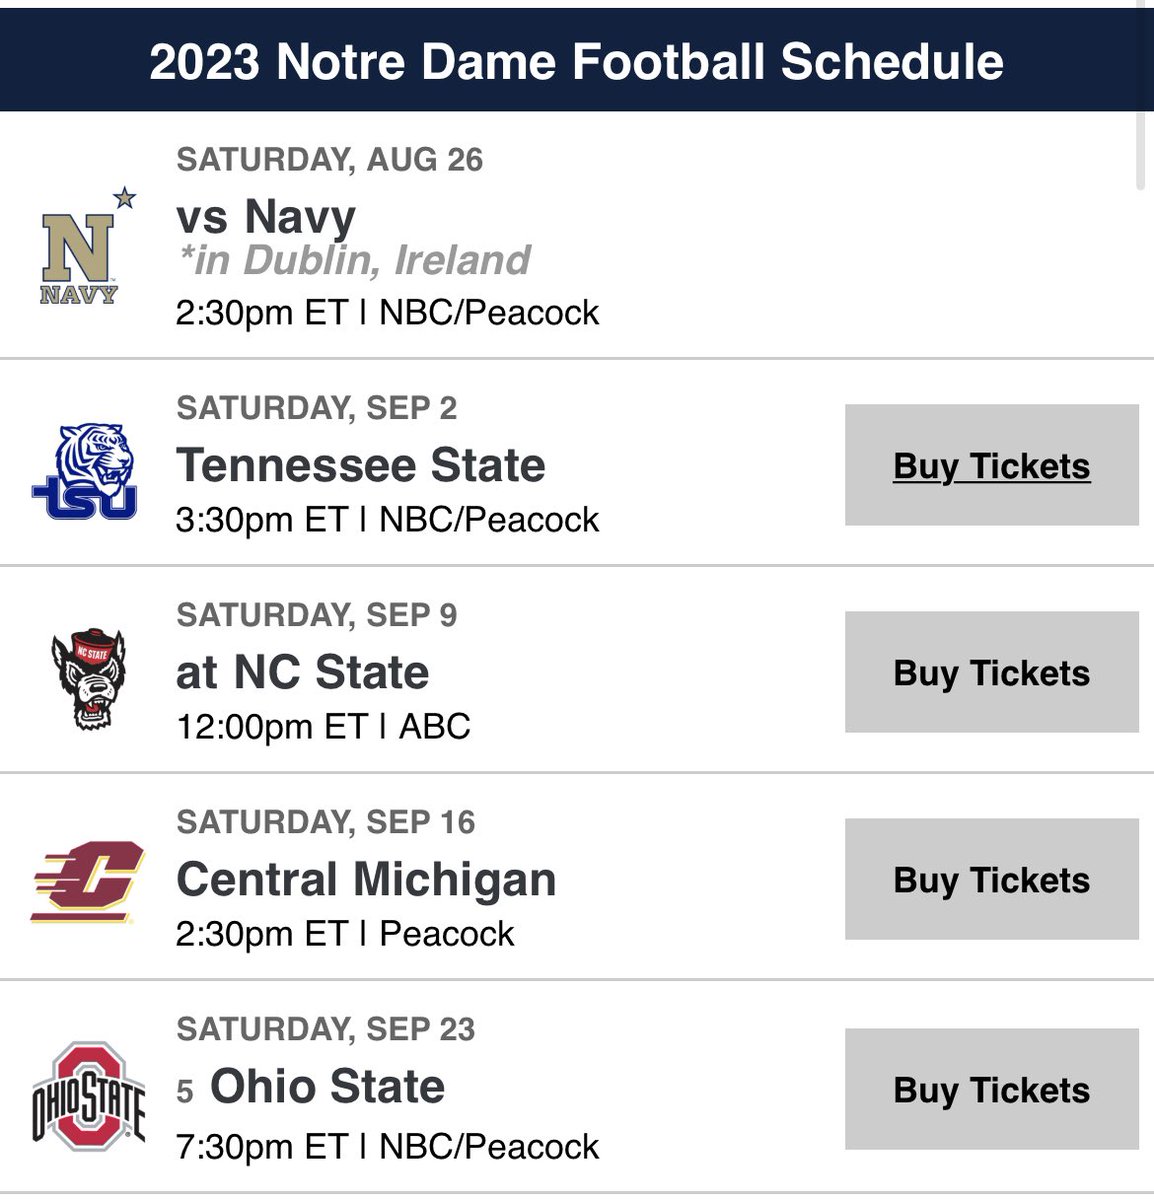 It’s college football so anything can happen, but there is a chance that Ohio State plays these 4 teams this year… 

If this happens, all 4 teams would most likely be in the Top 10. 

4-0 Notre Dame 
6-0 Penn State
7-0 Wisconsin
11-0 Michigan https://t.co/7qZXO5kCJd